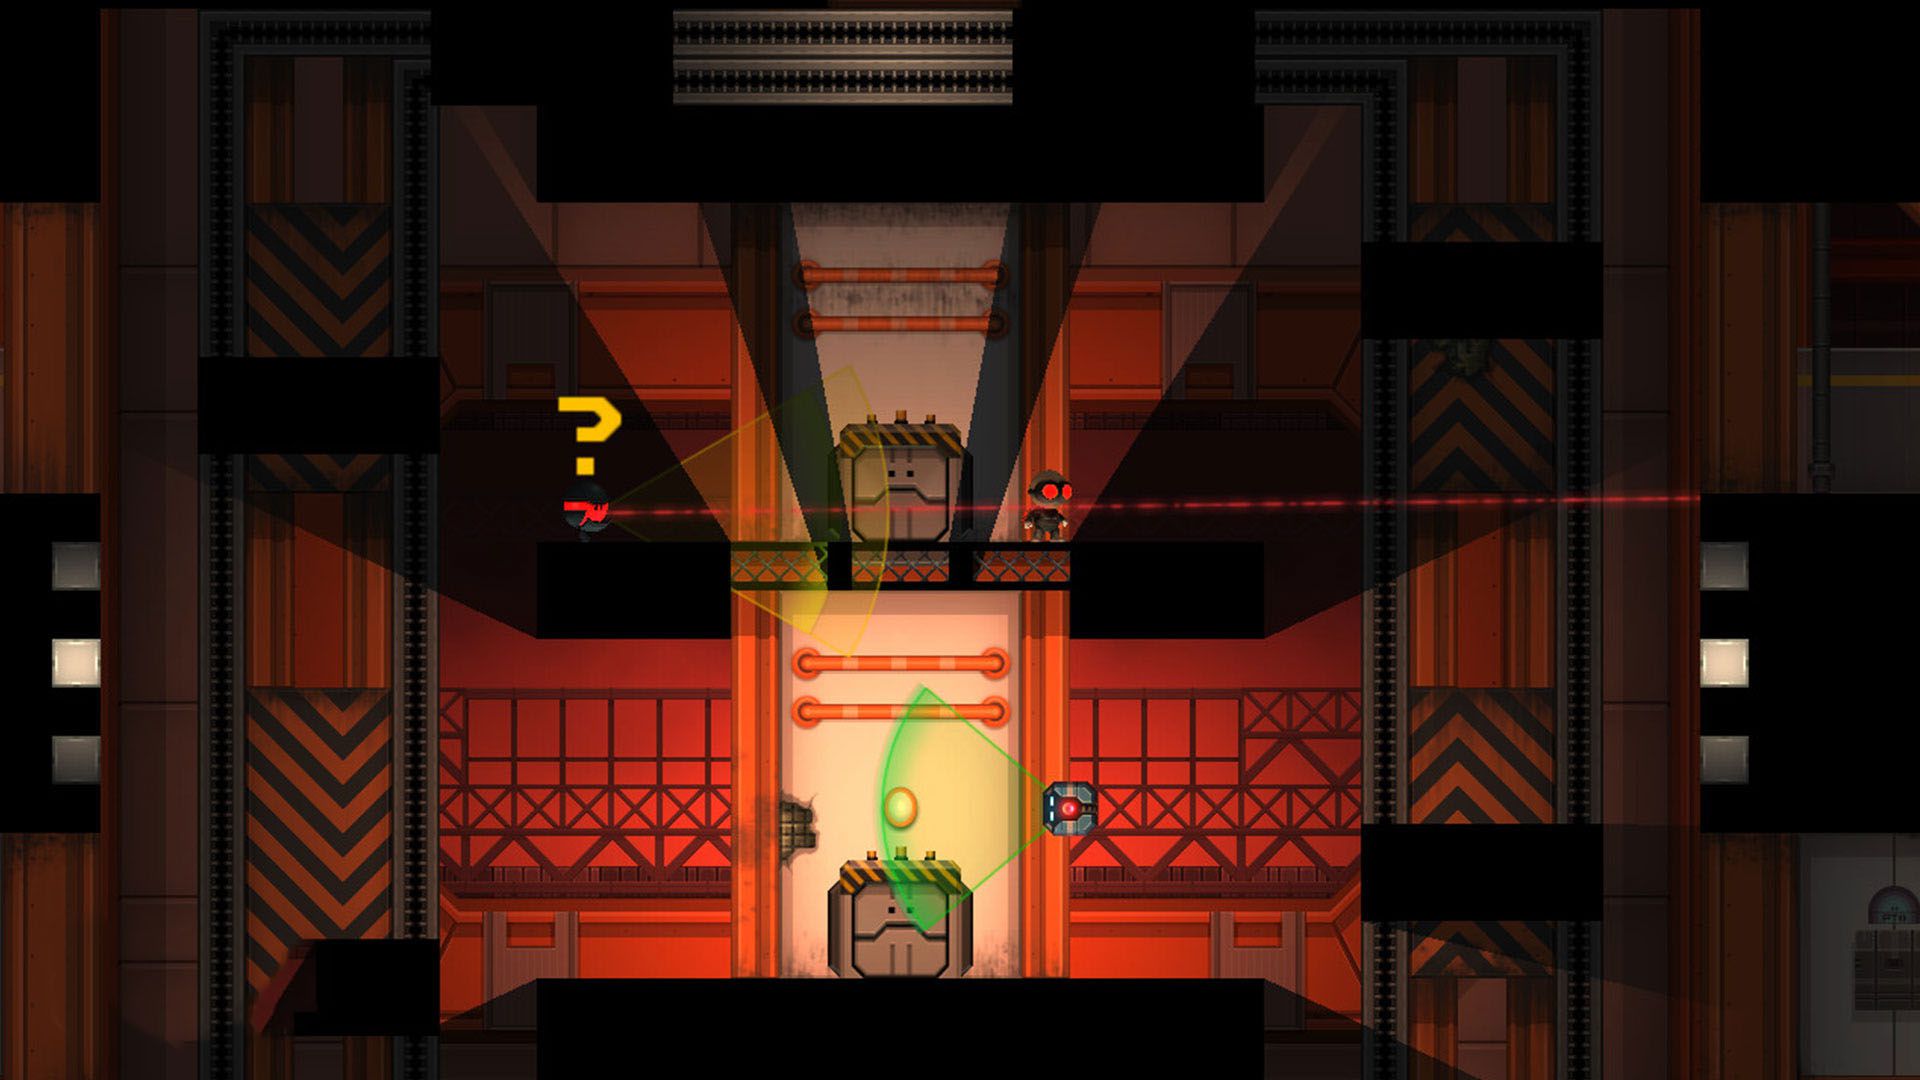 Stealth Inc 2 A Game of Clones